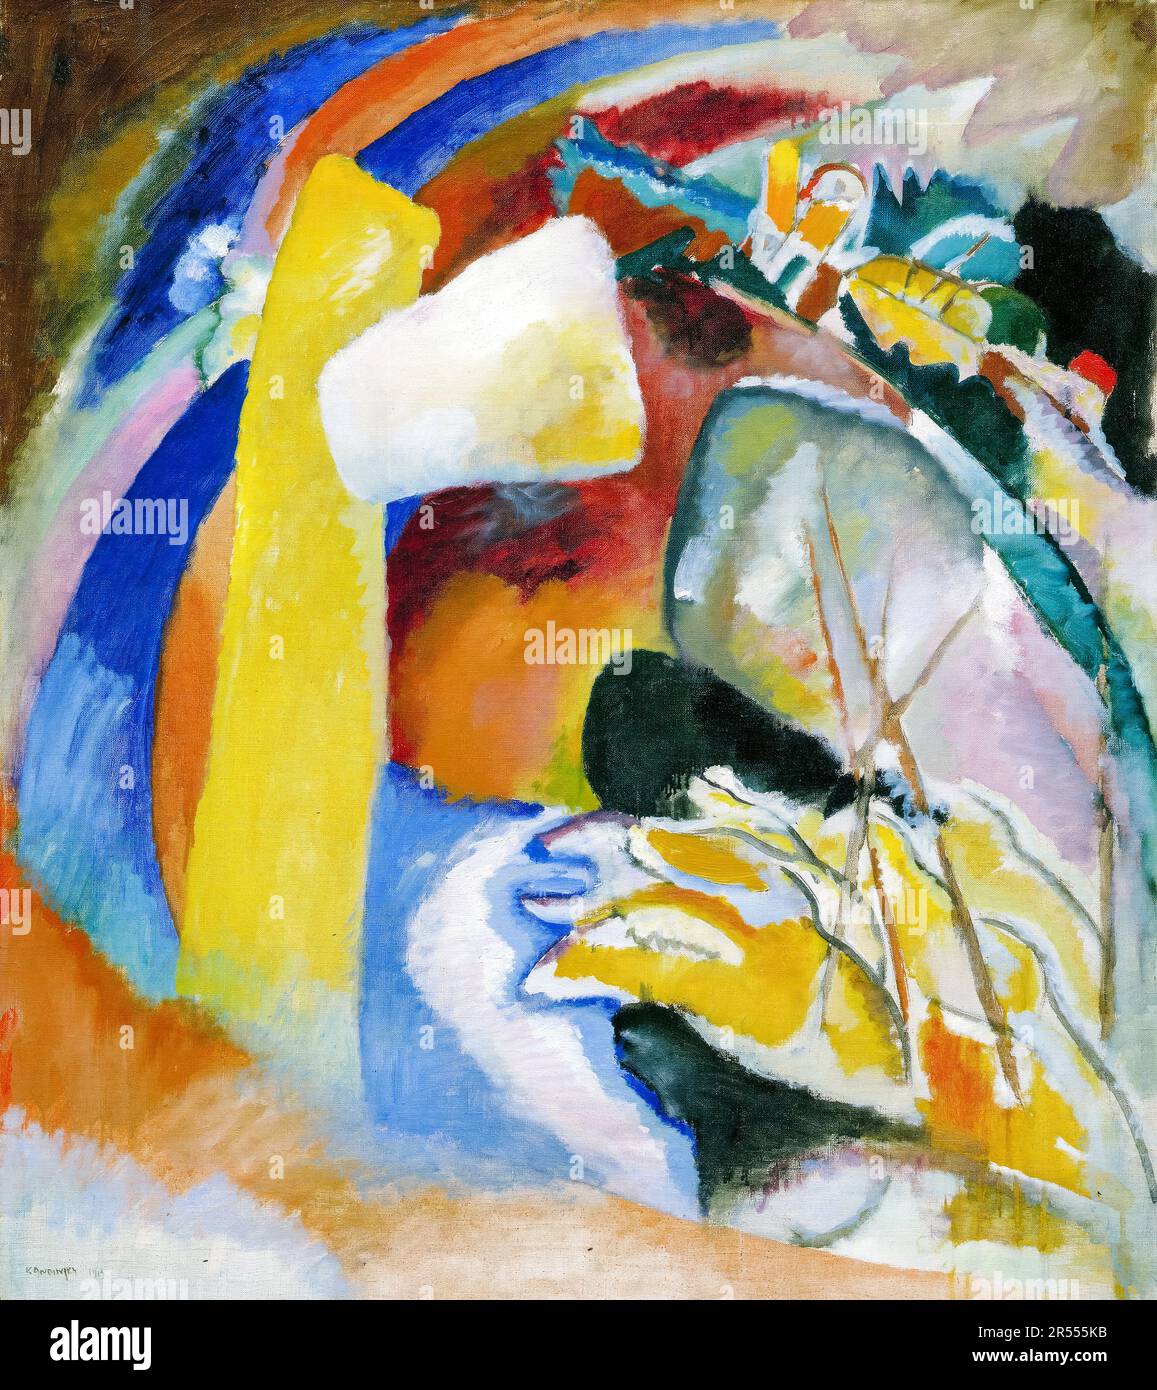 Wassily Kandinsky, Study for Painting with White Form, abstract painting 1913 Stock Photo